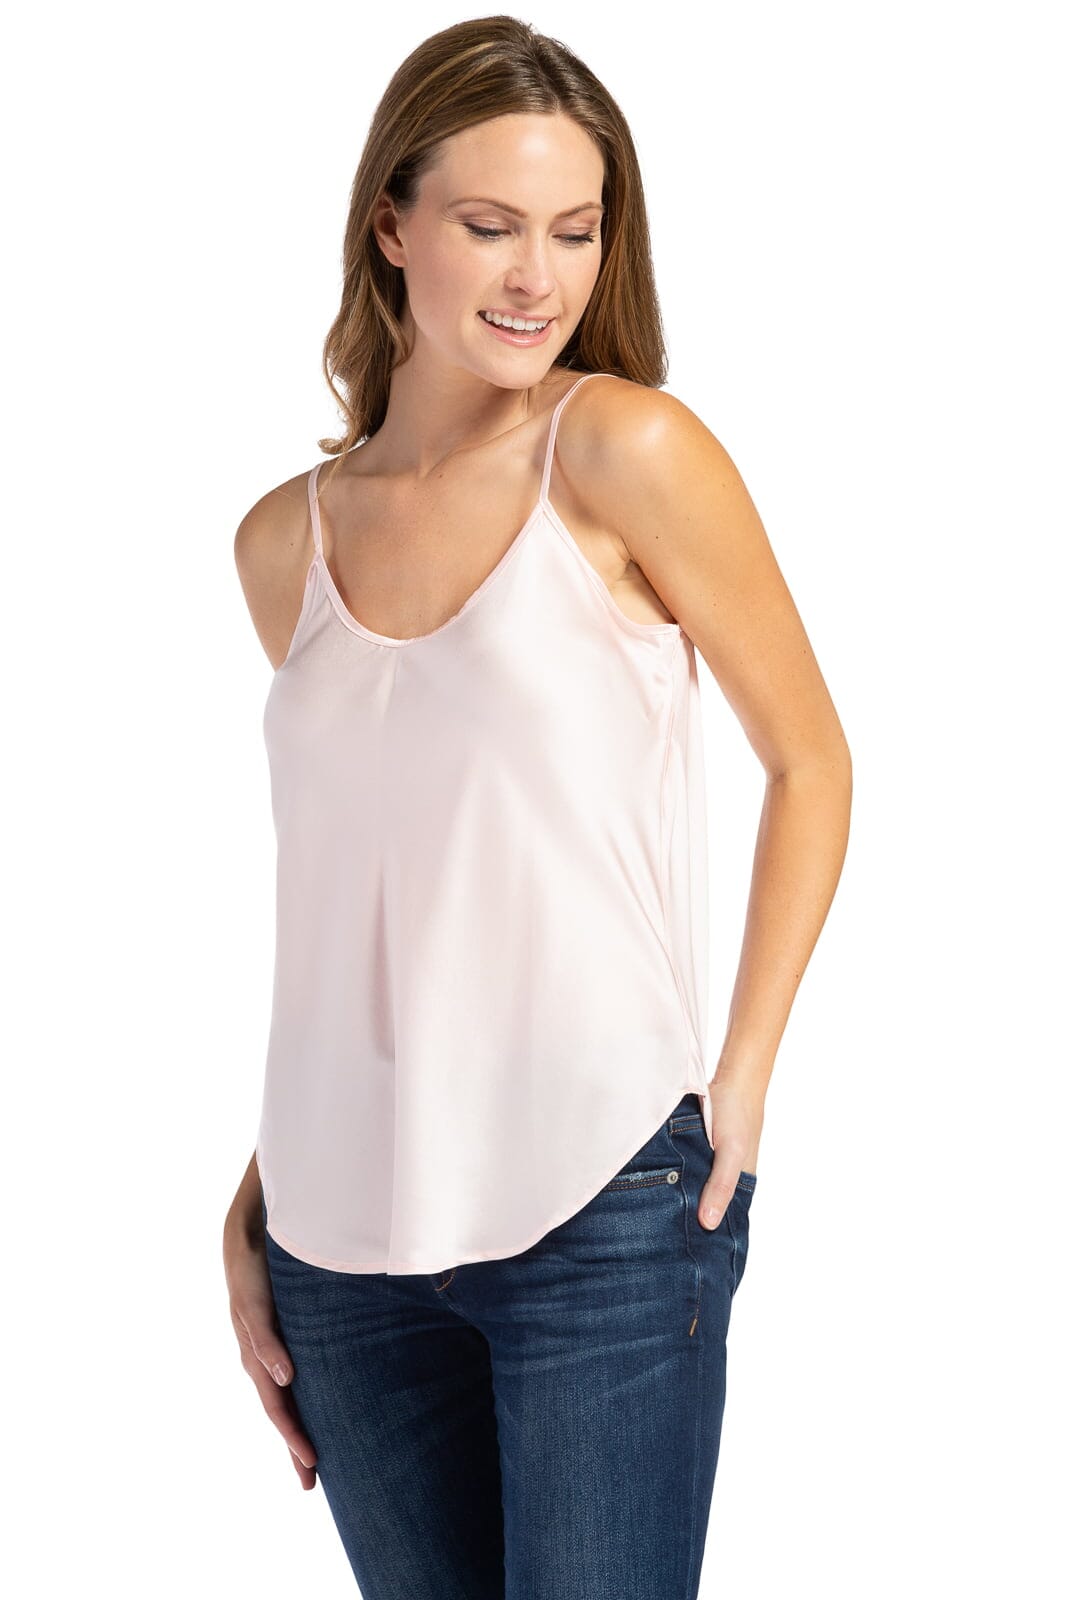 Women's 100% Pure Mulberry Silk Camisole Tank Top with Adjustable Spaghetti Straps - IMPROVED FIT Womens>Casual>Top Fishers Finery Havenly Pink